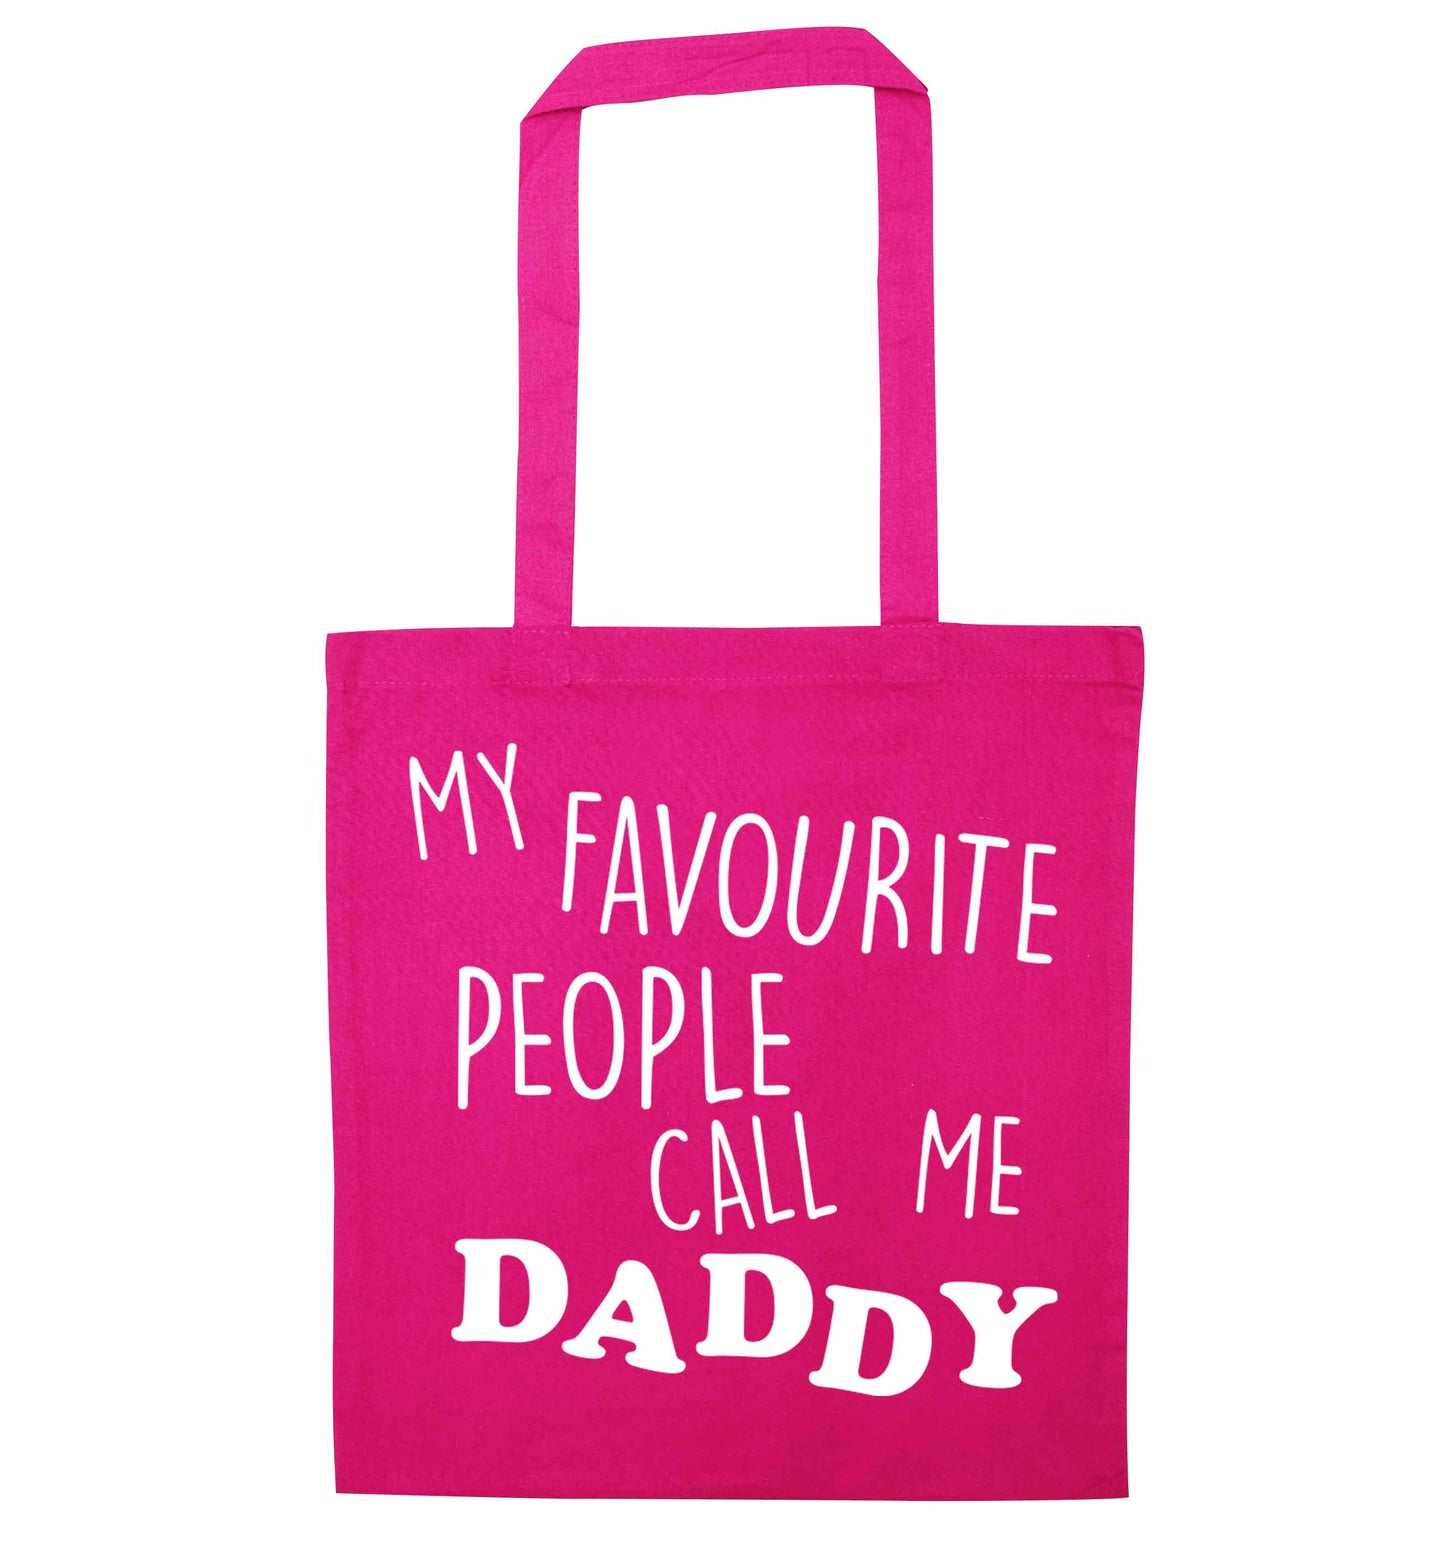 My favourite people call me daddy pink tote bag